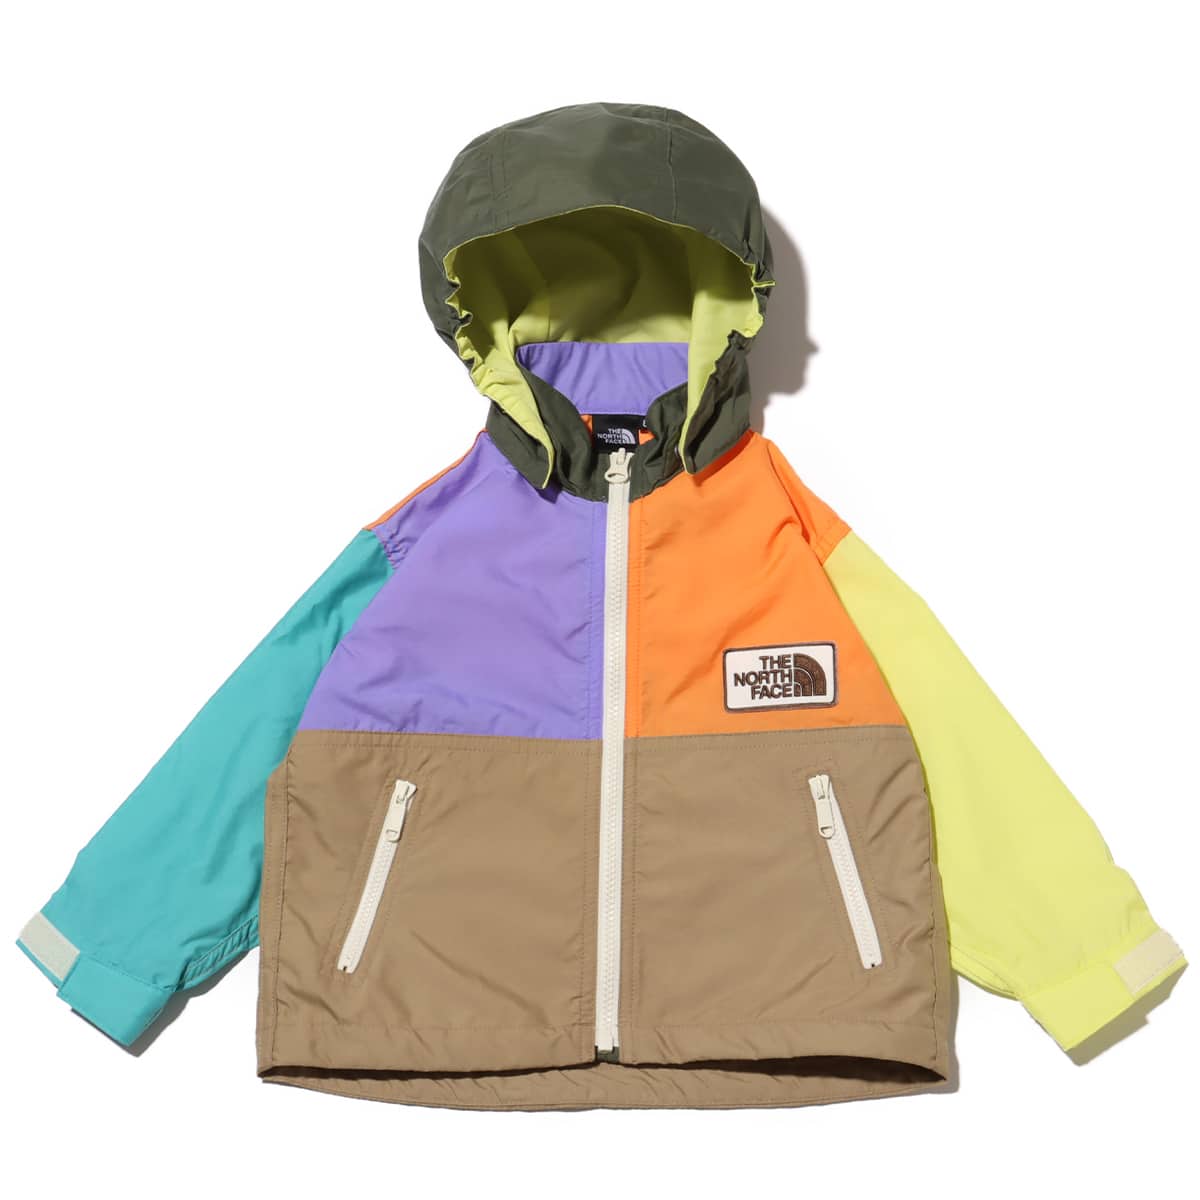 THE NORTH FACE Baby Grand Compact Jacket マルチカラー5 24SS-I